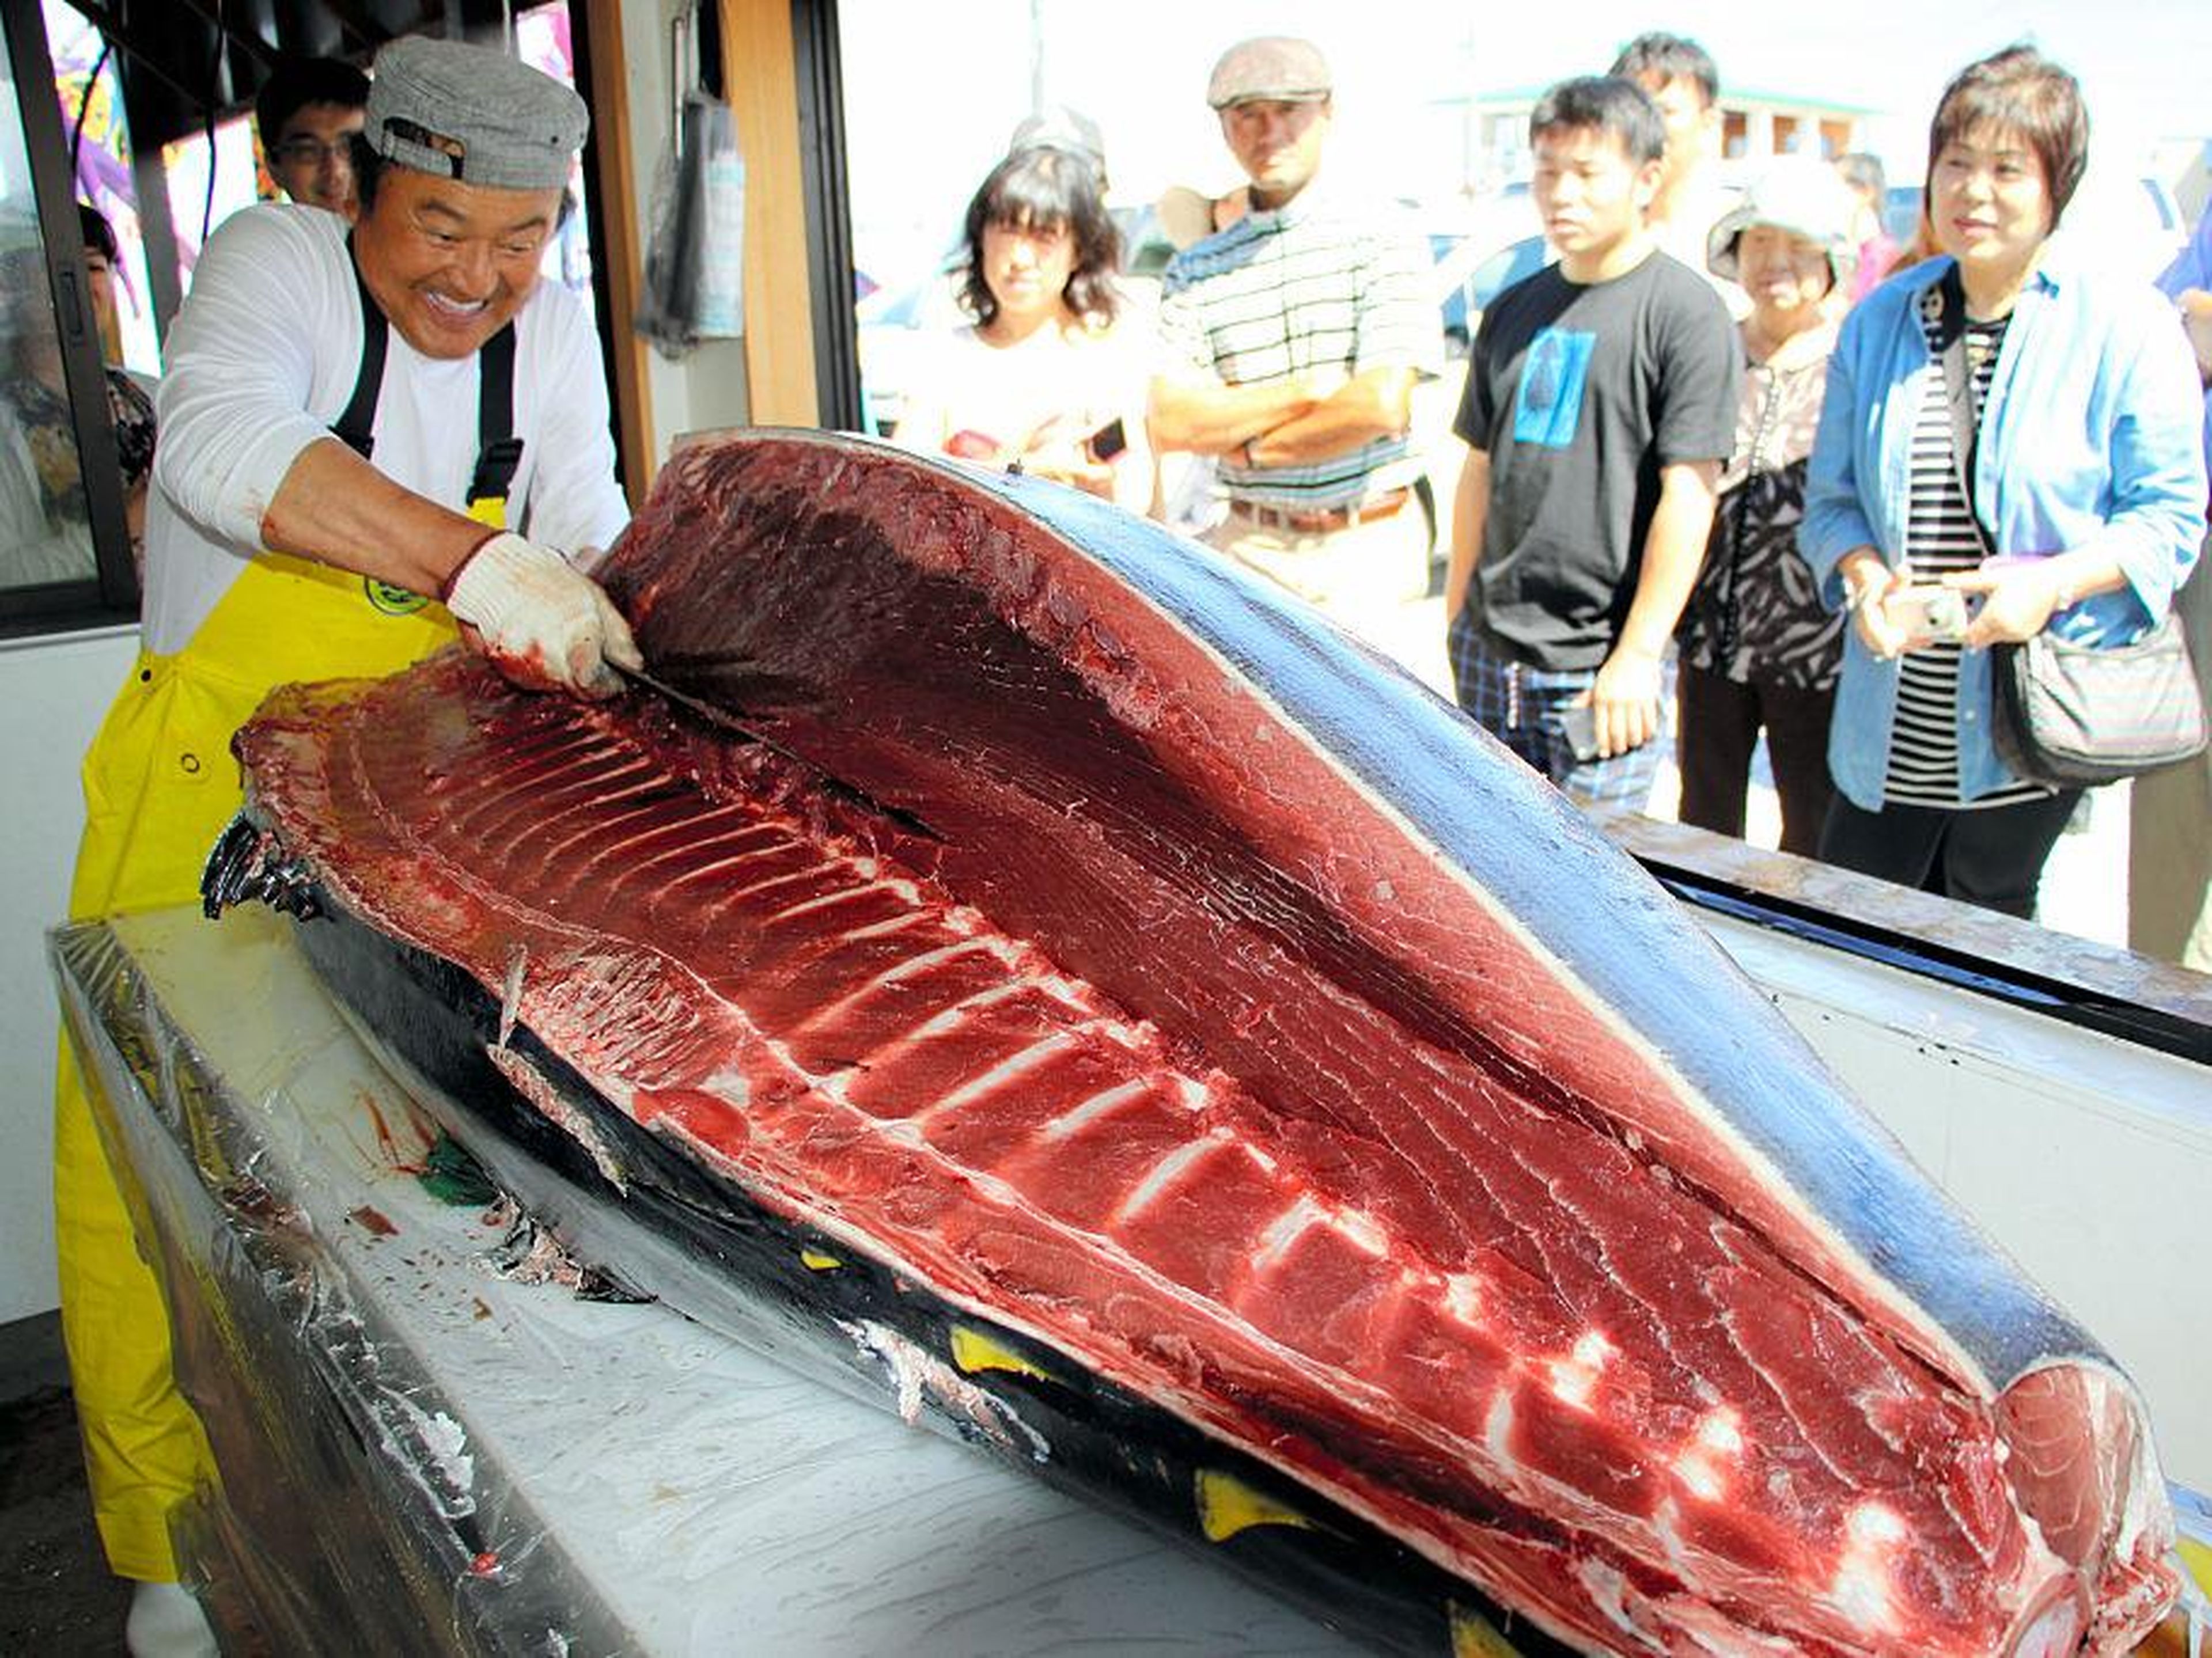 The 2013 massive, 489-pound fish came from Oma, Aomori — about a two-hour drive from Aomori City. The bluefin tuna that comes from Oma is said to be the best in the world.